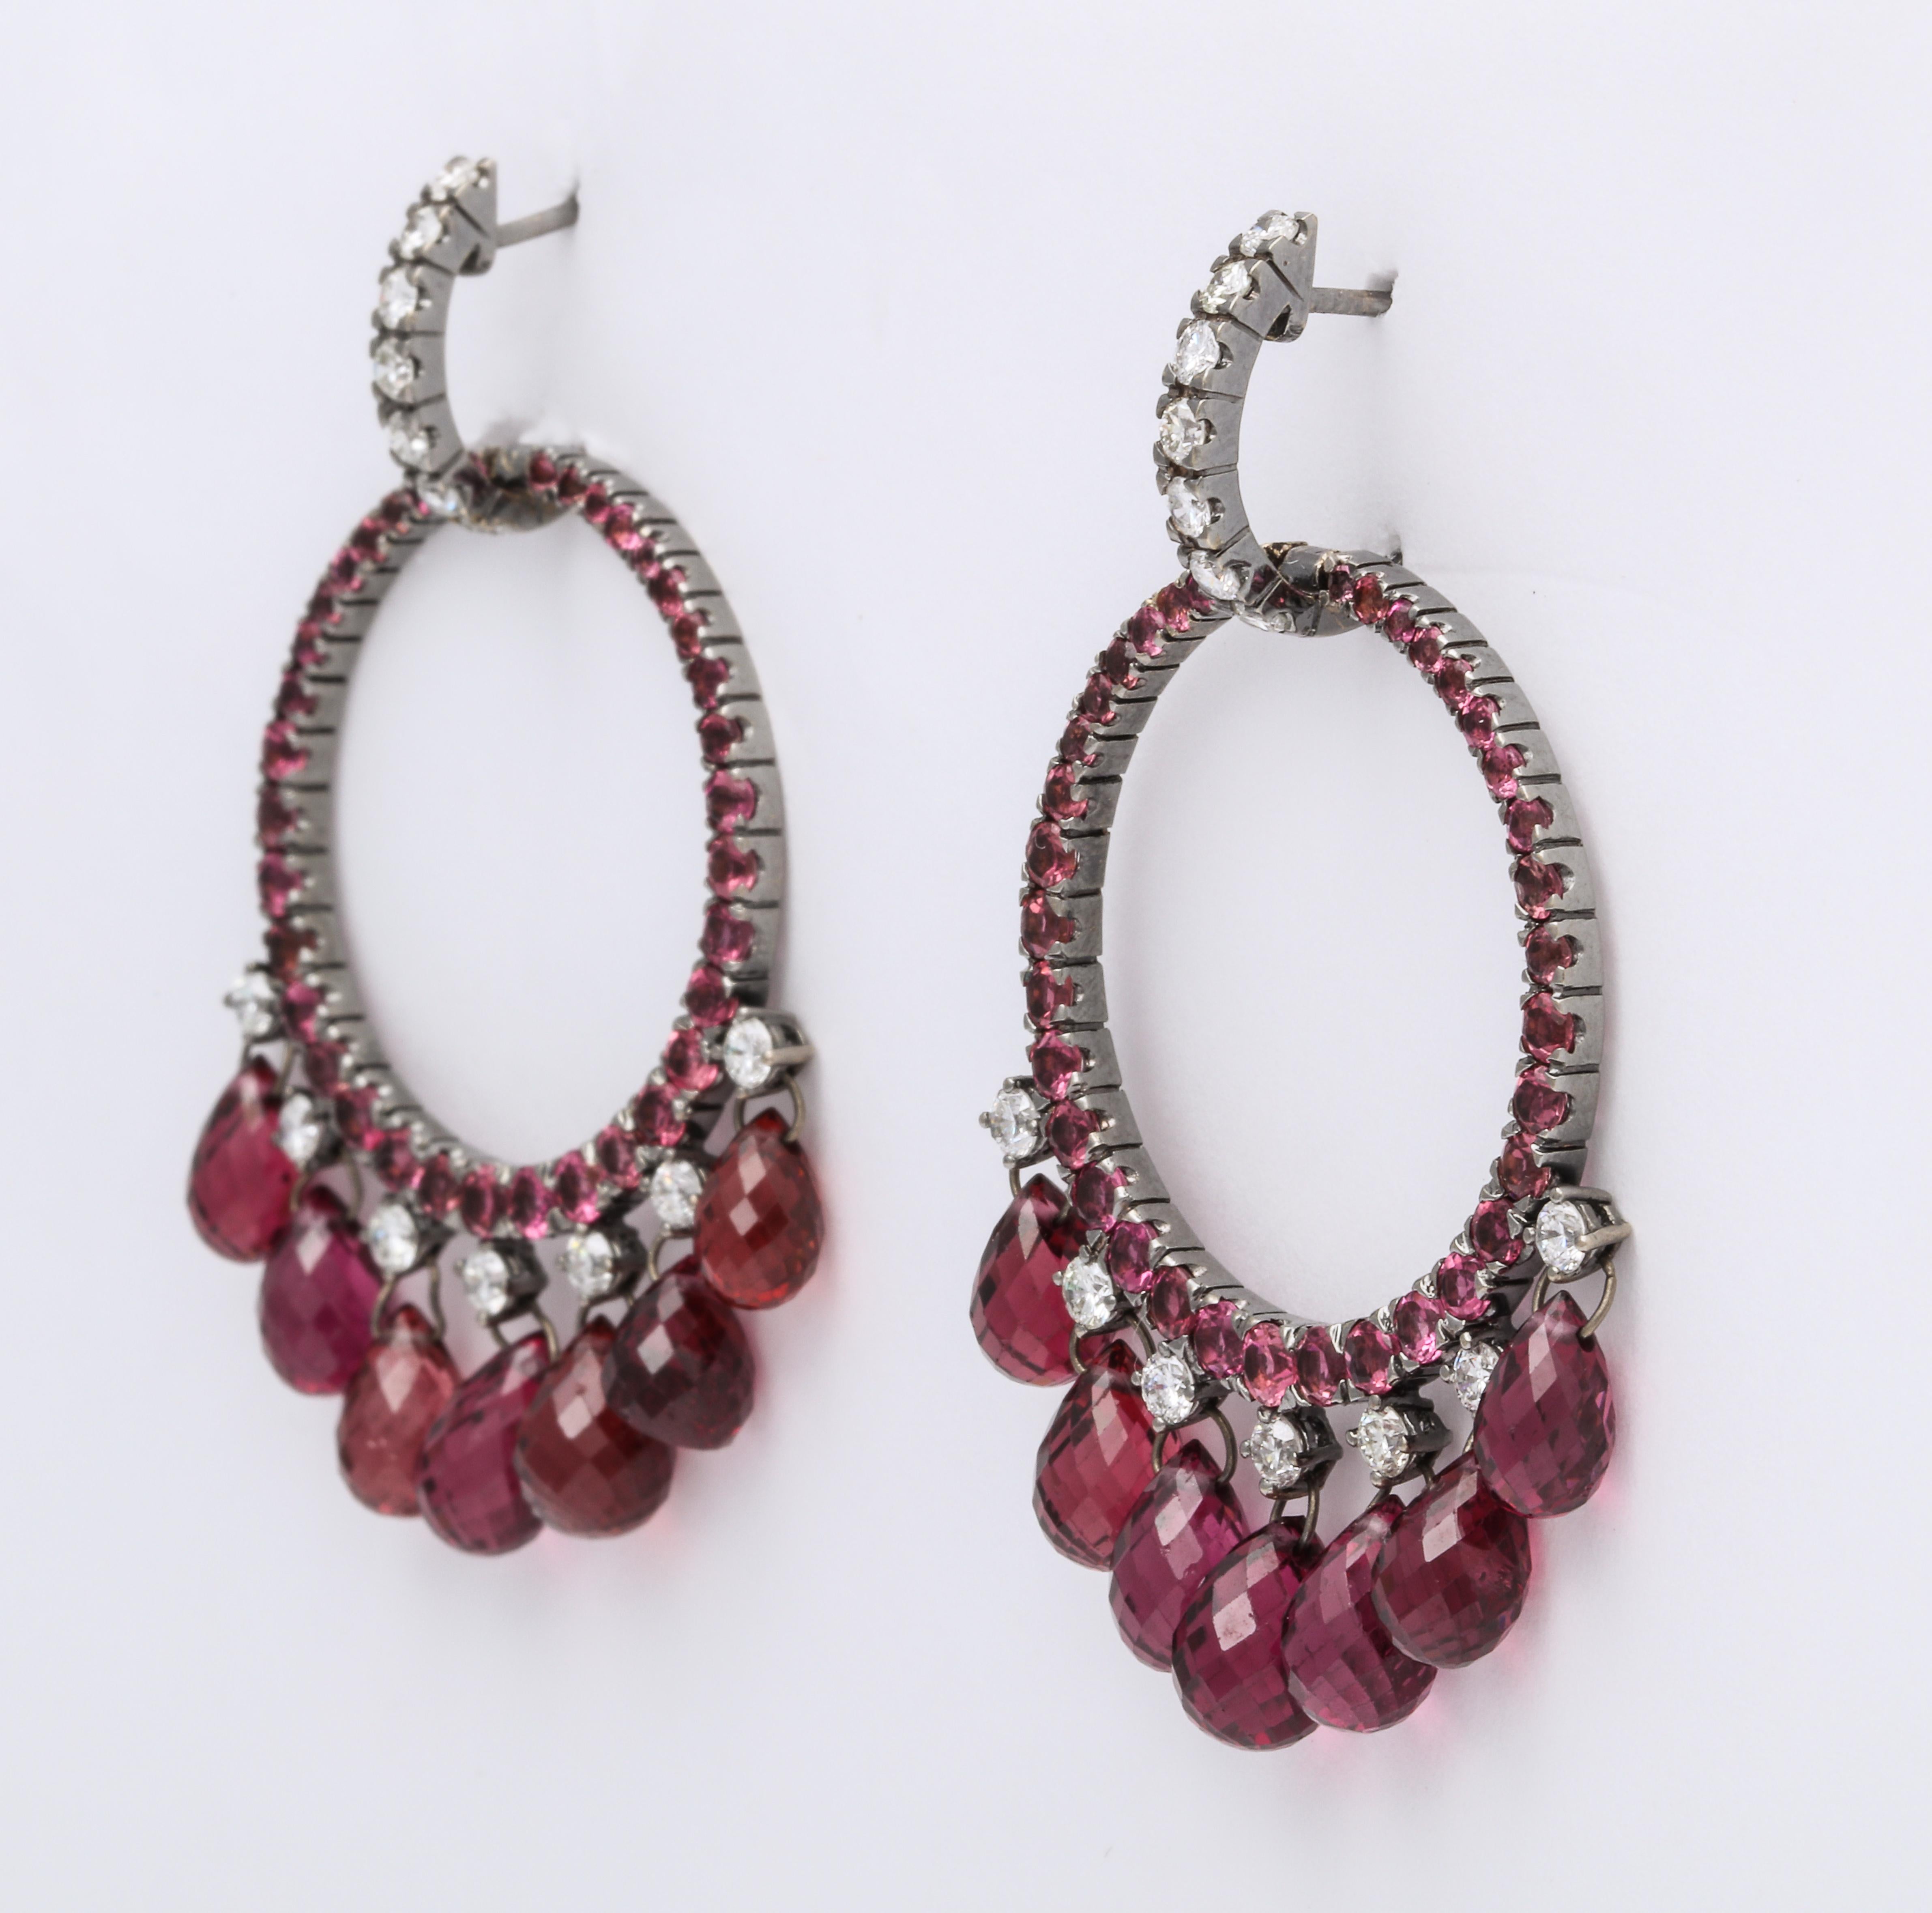 Contemporary White Gold, Diamond and Pink Tourmaline Briolette Earrings For Sale